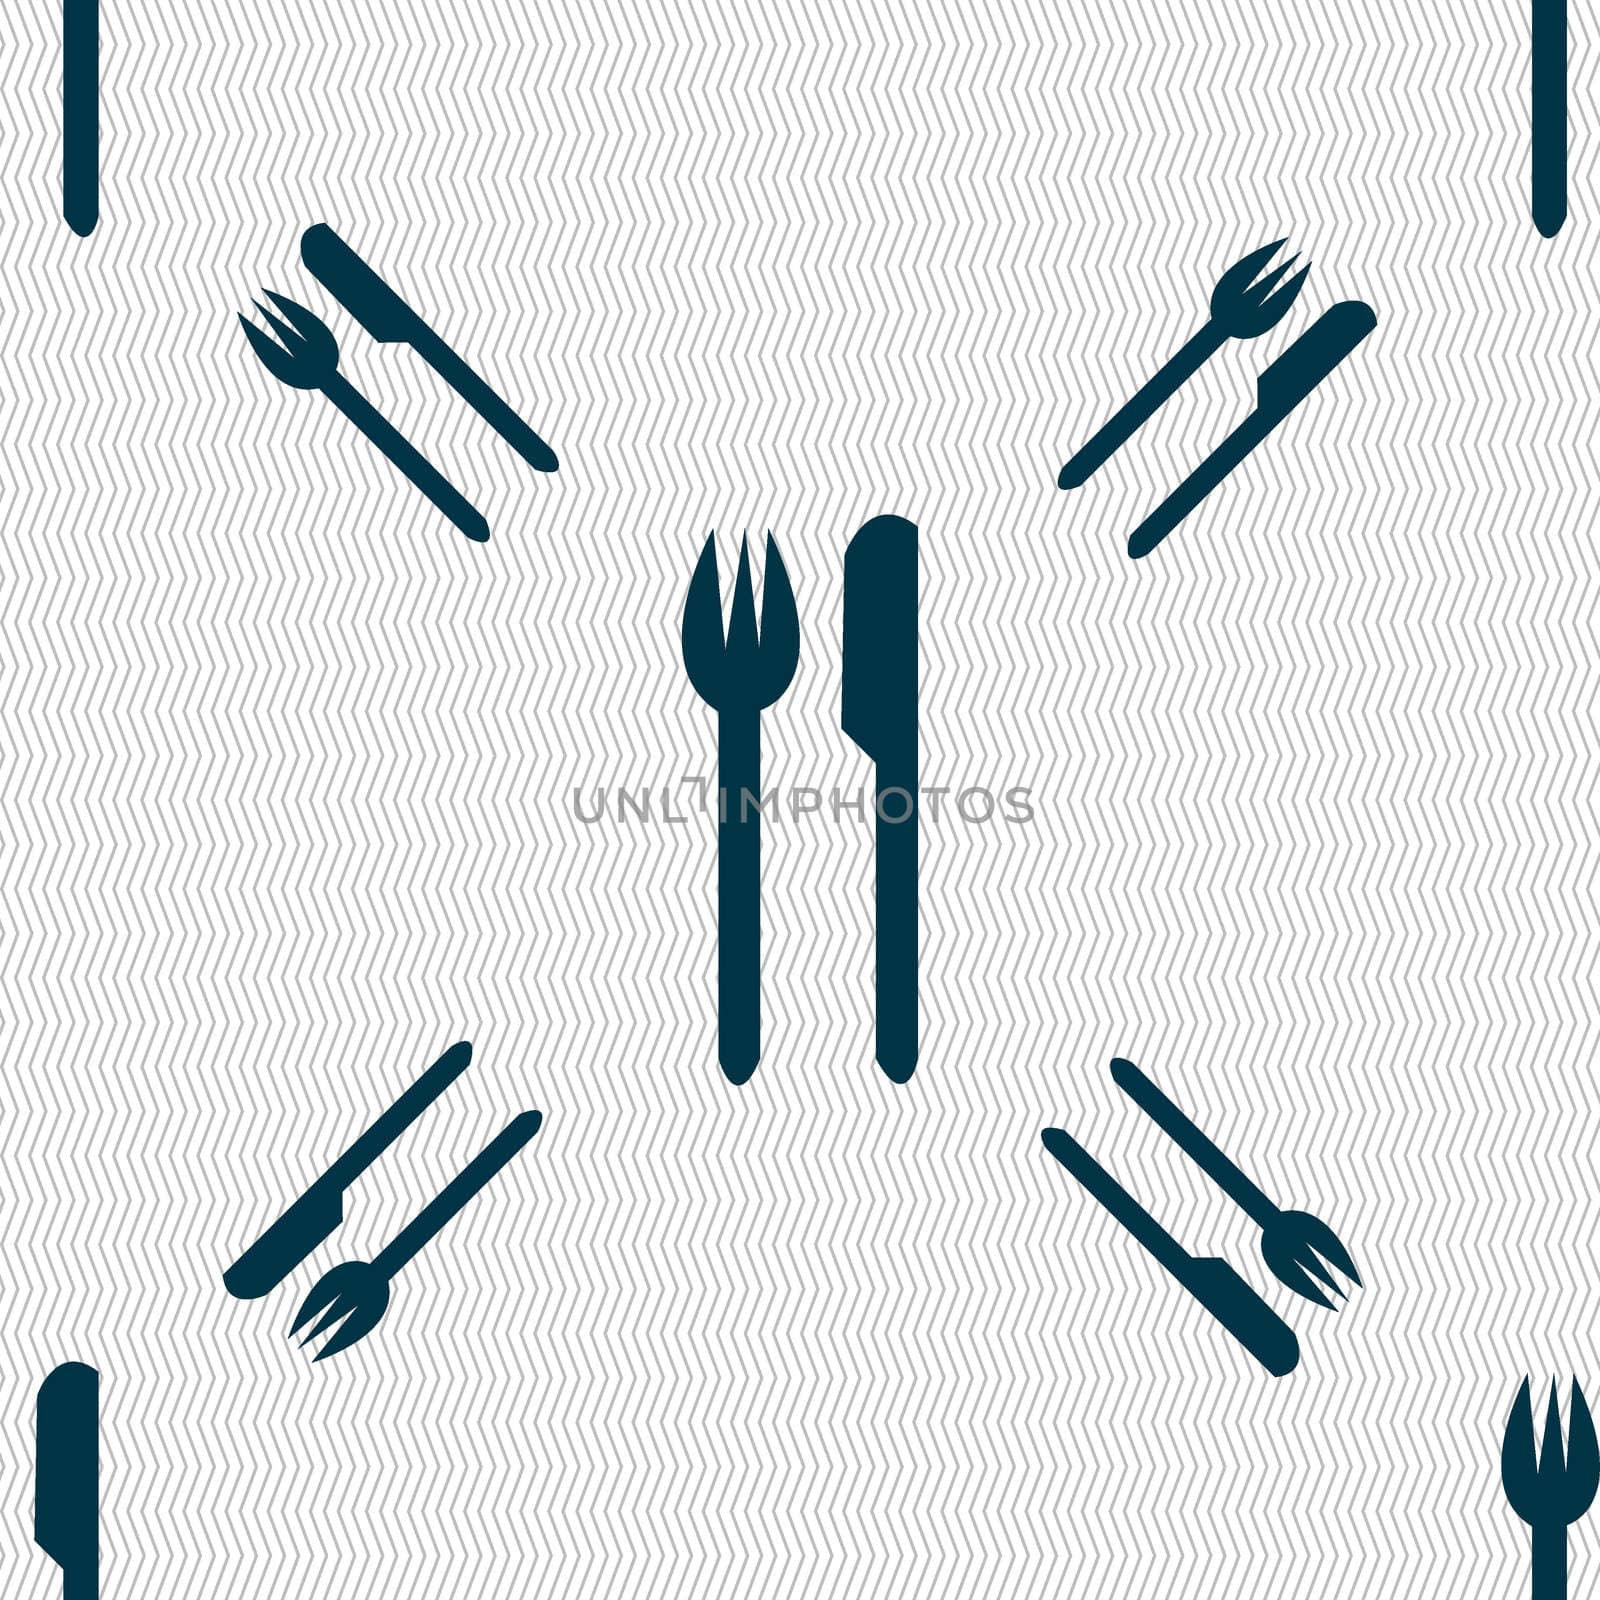 Eat sign icon. Cutlery symbol. Fork and knife. Seamless pattern with geometric texture. illustration